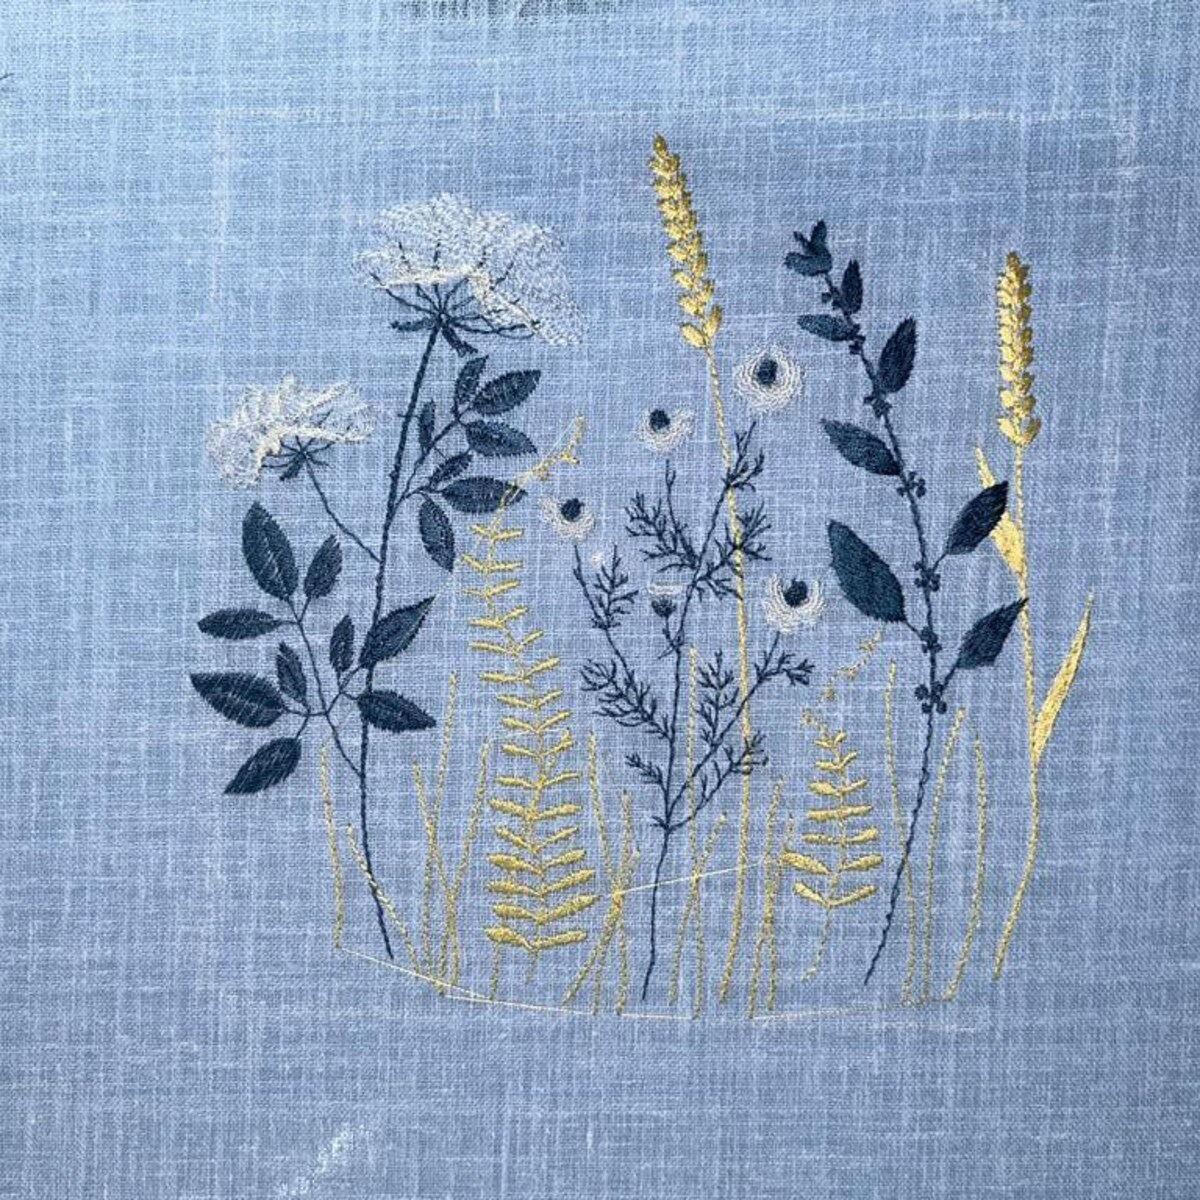 Garden Threads: Weaving Nature's Charm in Botanical Grass Embroidery